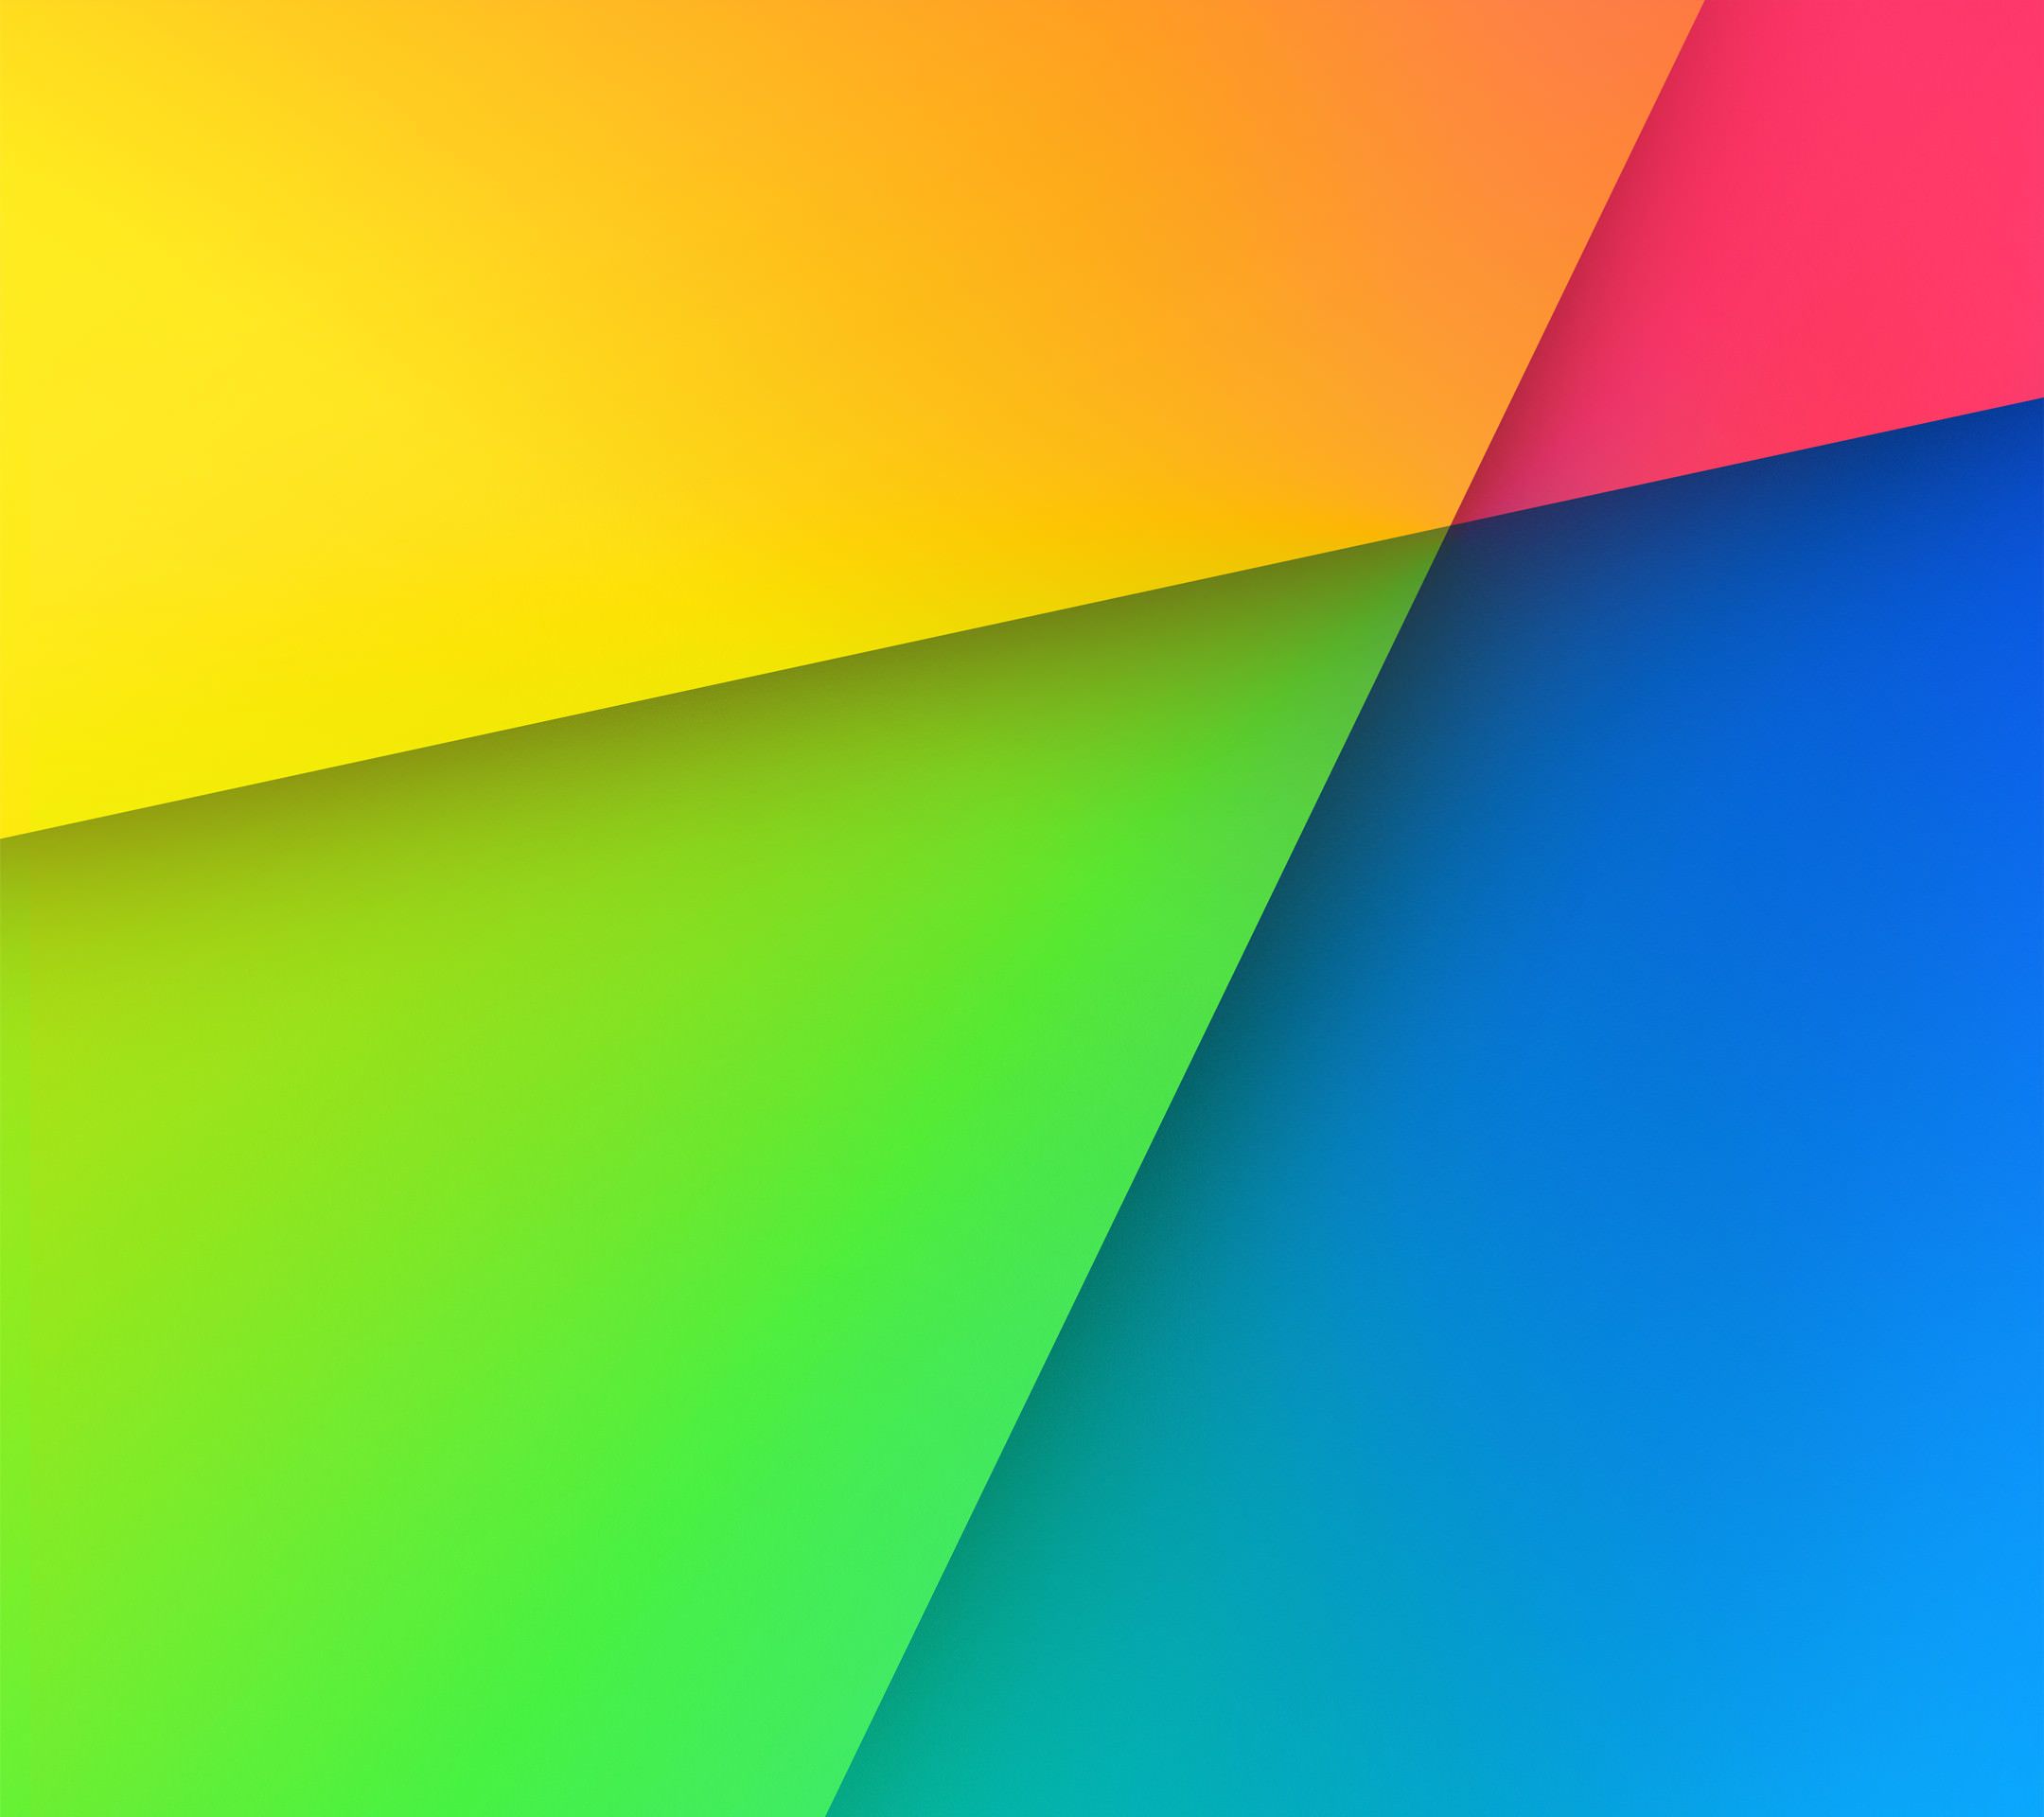 Colorful red, green and blue yellow. wallpaper.sc SmartPhone. Nexus Best wallpaper android, Android wallpaper